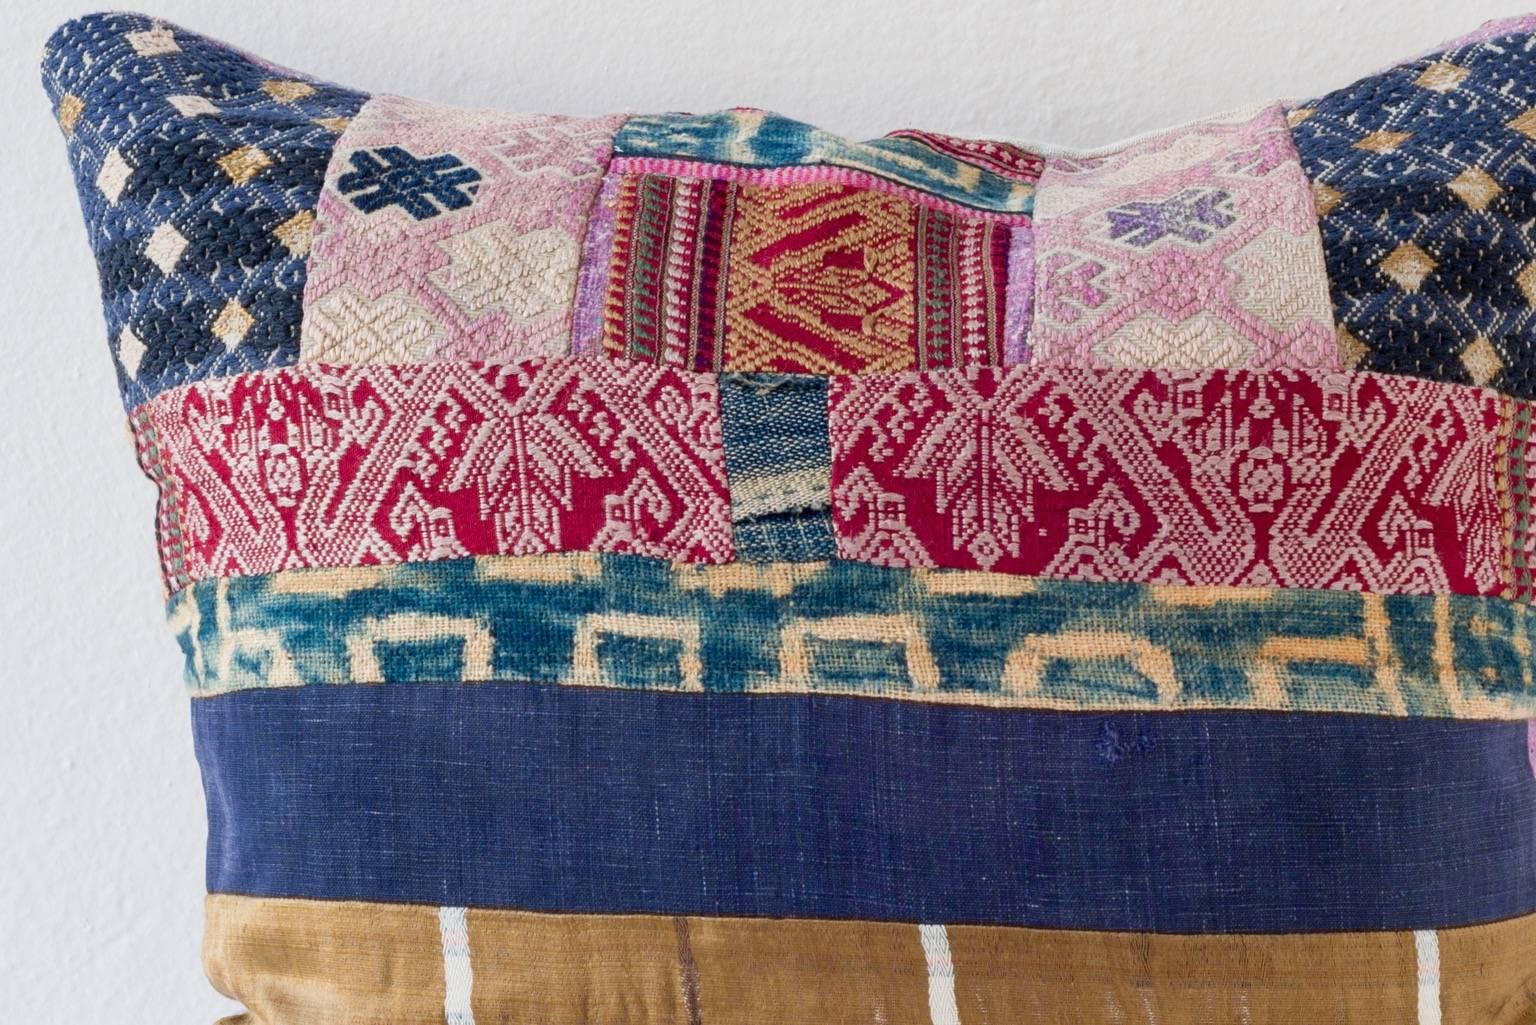 Multi-Continent Textile Pillows  In Excellent Condition For Sale In Los Angeles, CA